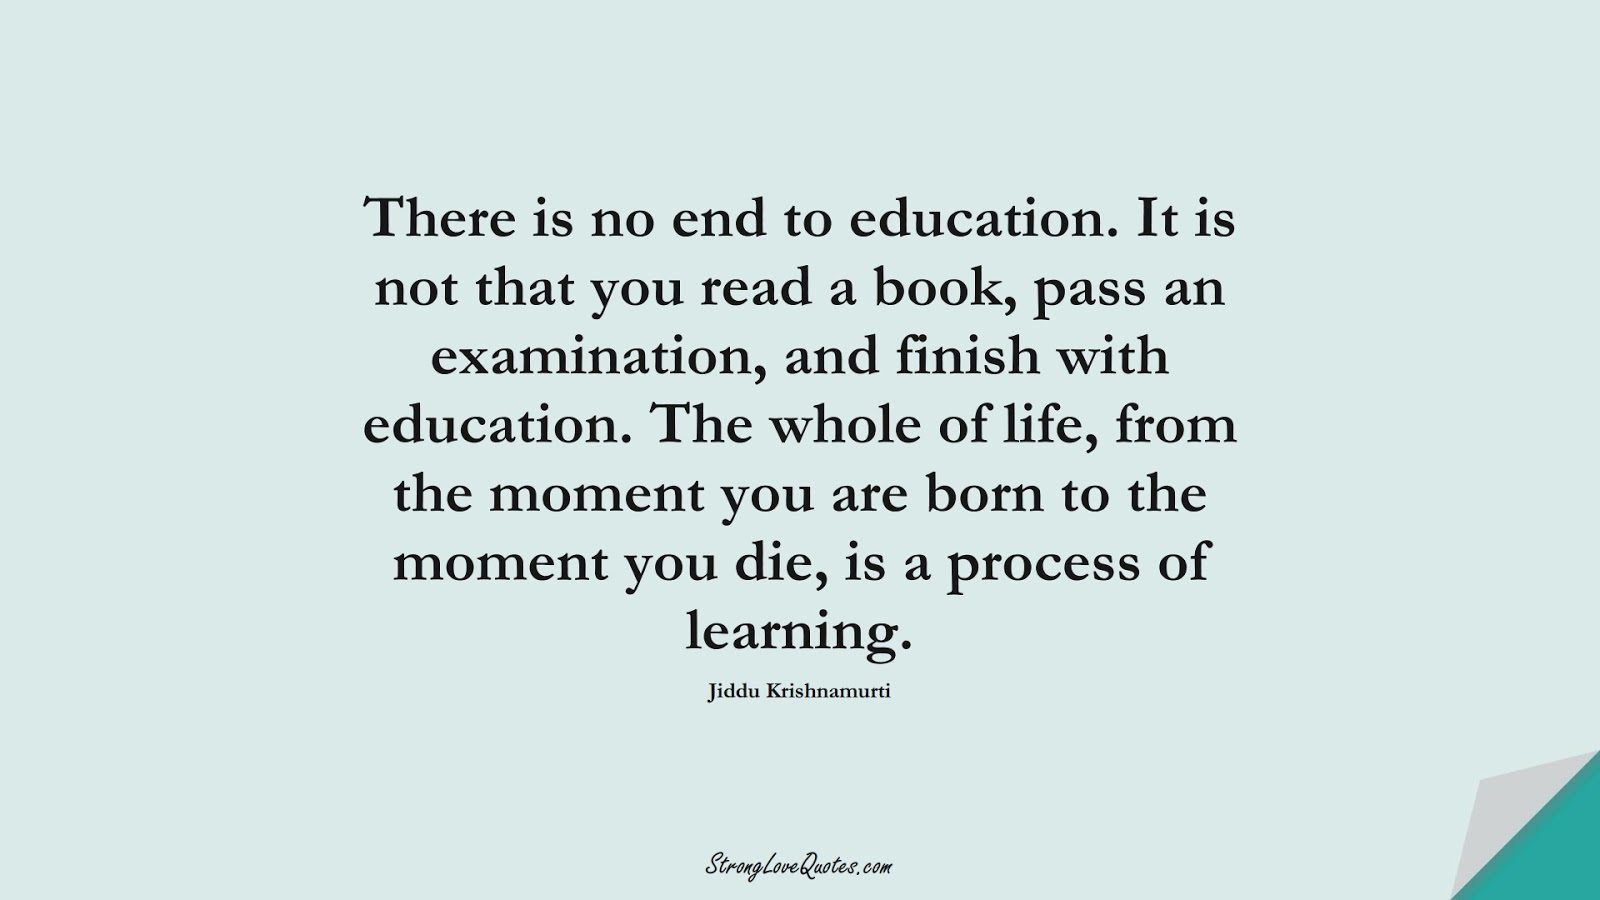 There is no end to education. It is not that you read a book, pass an examination, and finish with education. The whole of life, from the moment you are born to the moment you die, is a process of learning. (Jiddu Krishnamurti);  #LearningQuotes